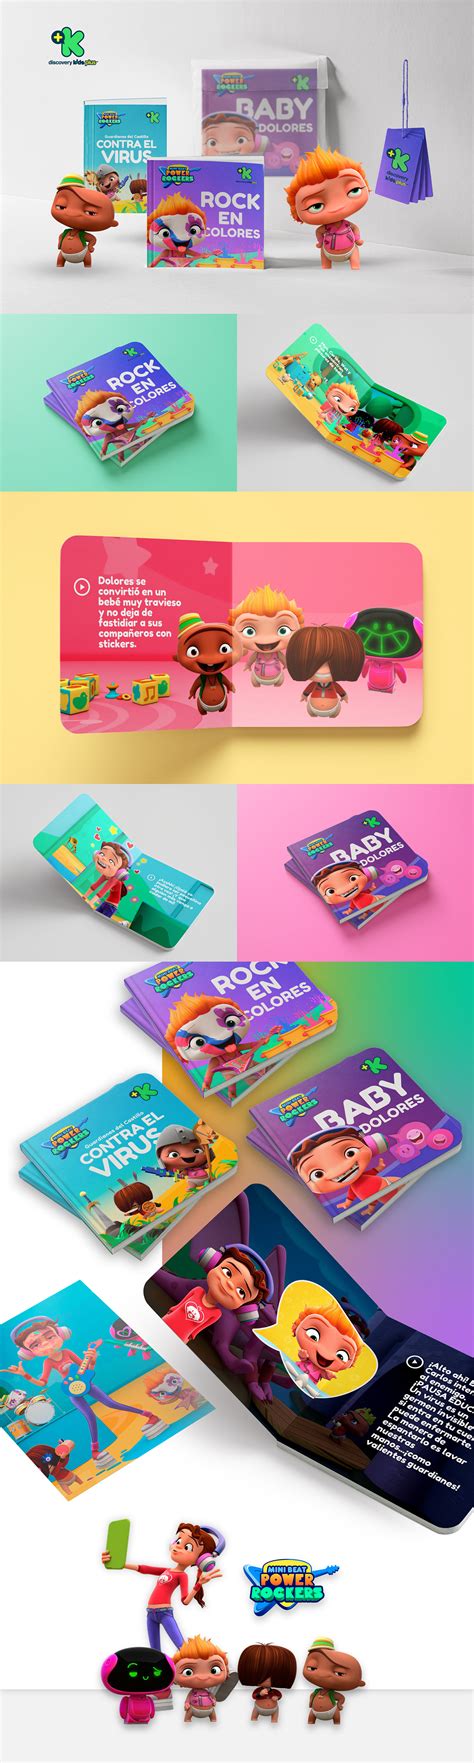 Discovery Kids On Behance